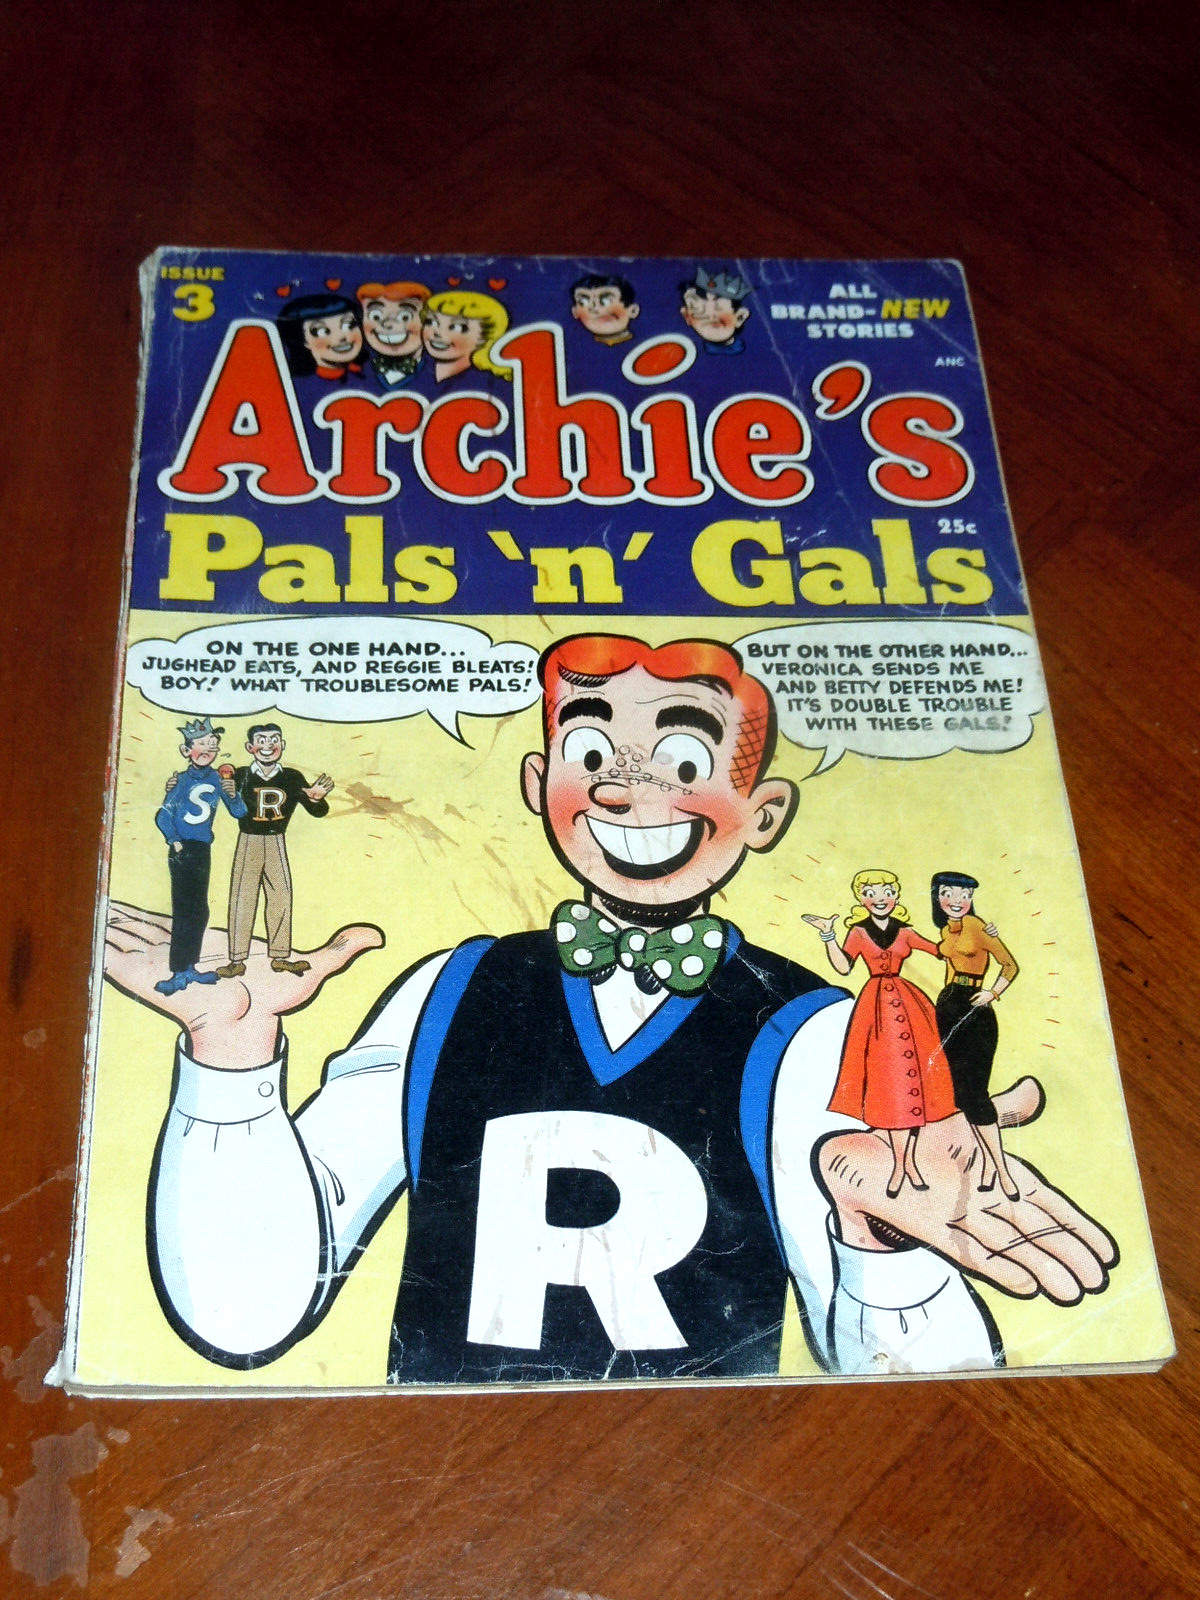 ARCHIE'S PALS 'N' GALS #3  (1955)   VG- (3.5) cond. Giant issue.  VERONICA BETTY